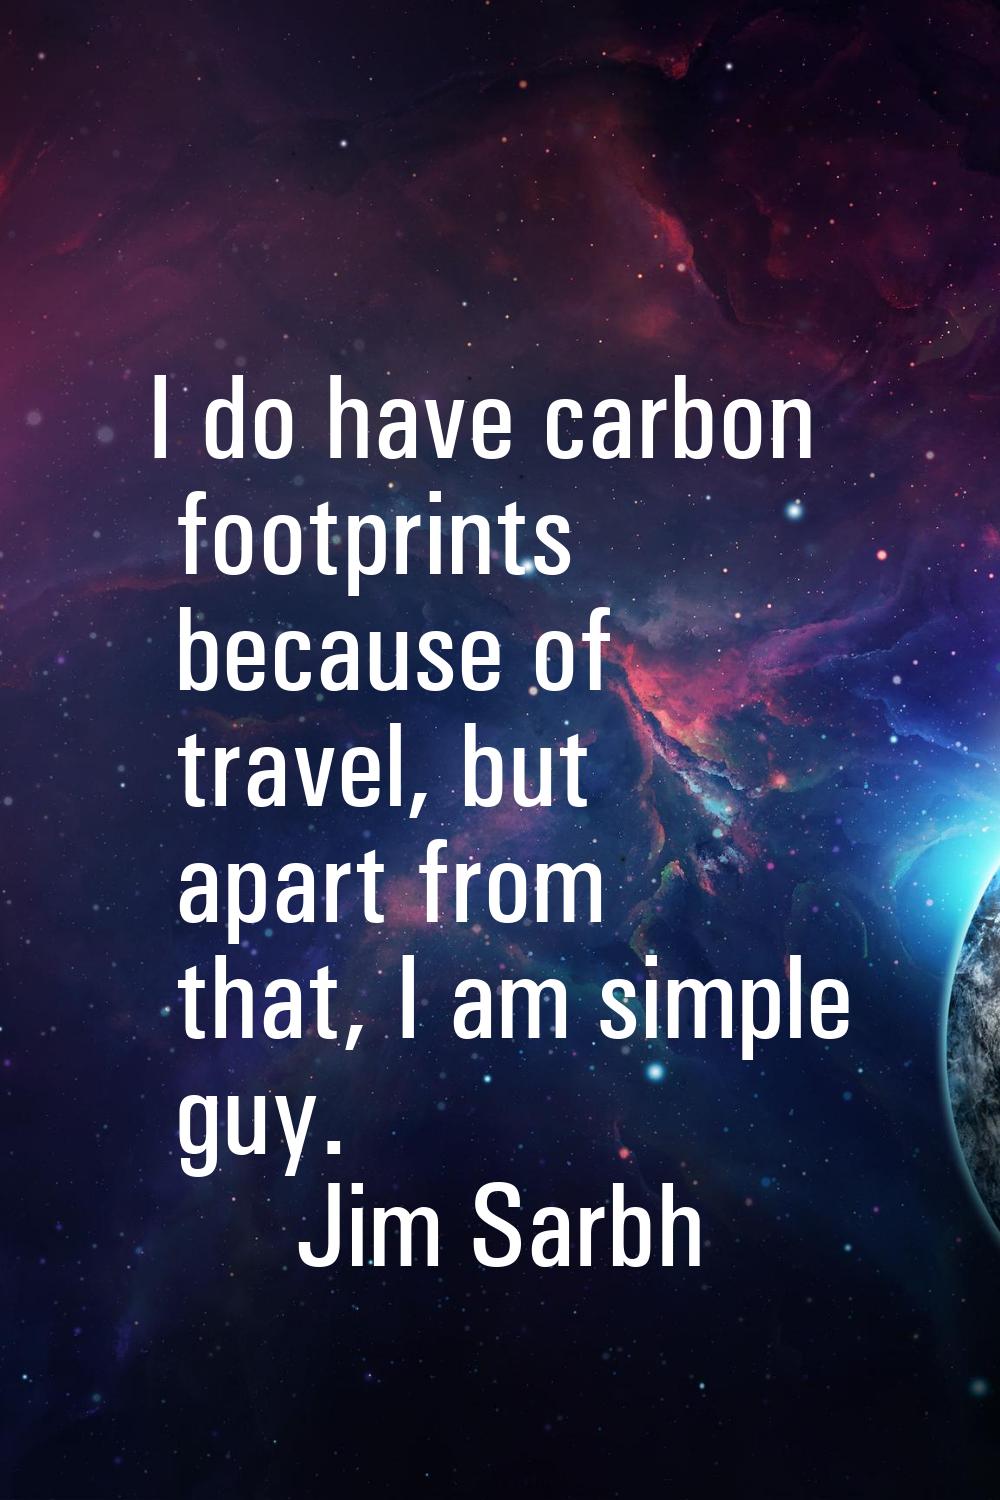 I do have carbon footprints because of travel, but apart from that, I am simple guy.